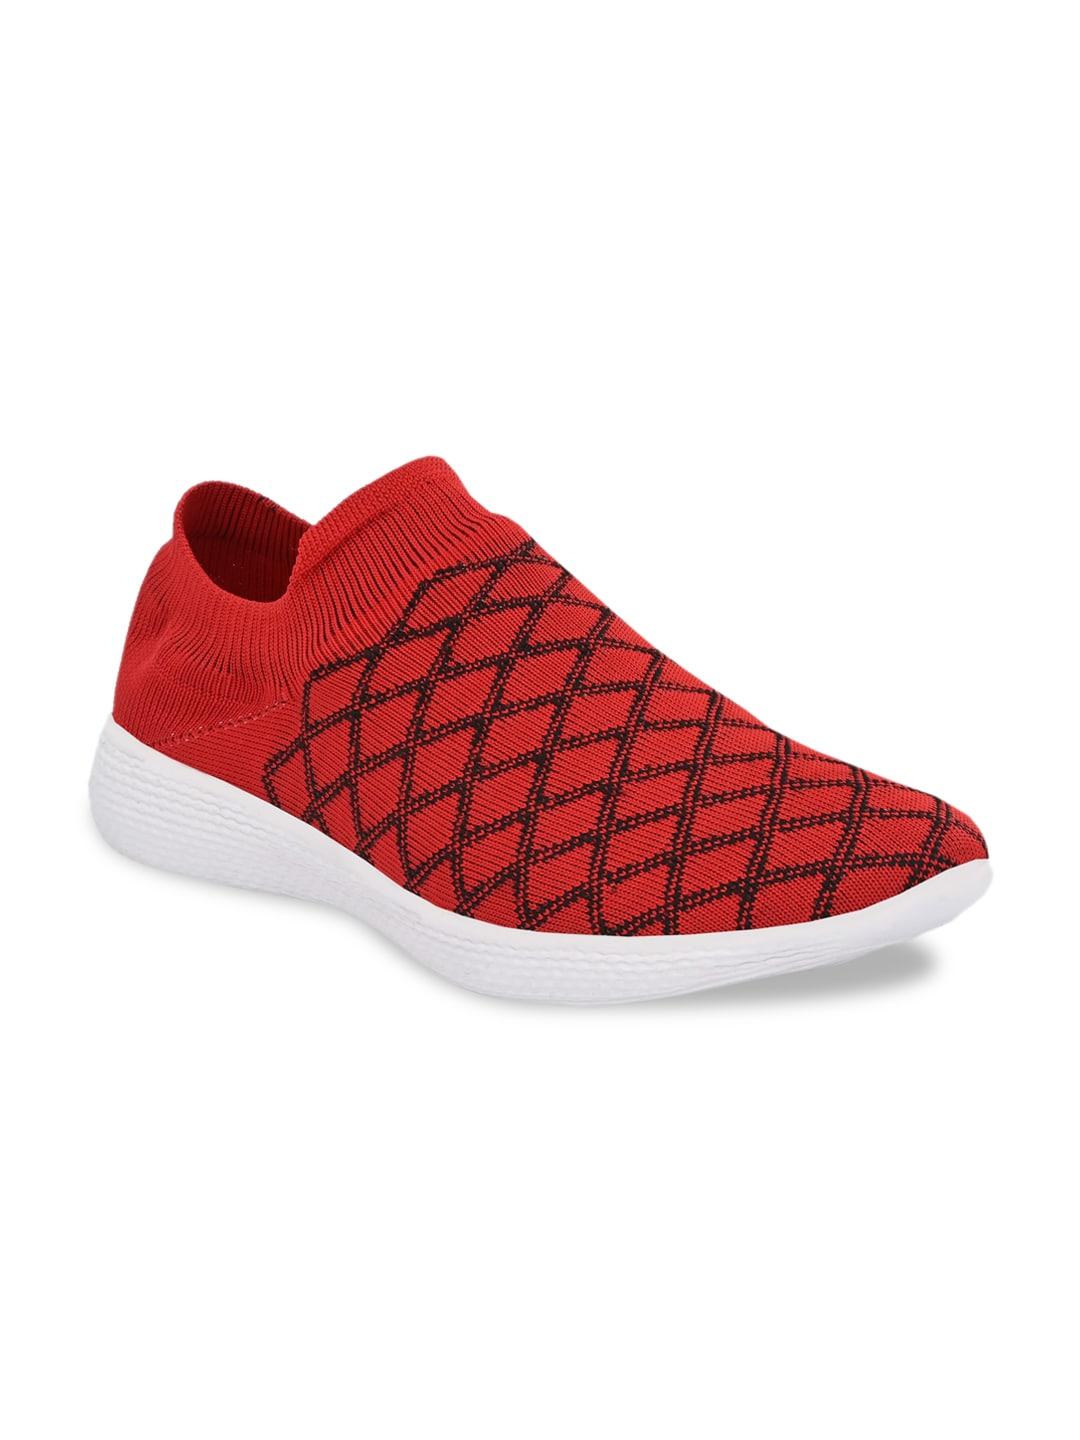 provogue men red woven design slip-on sneakers